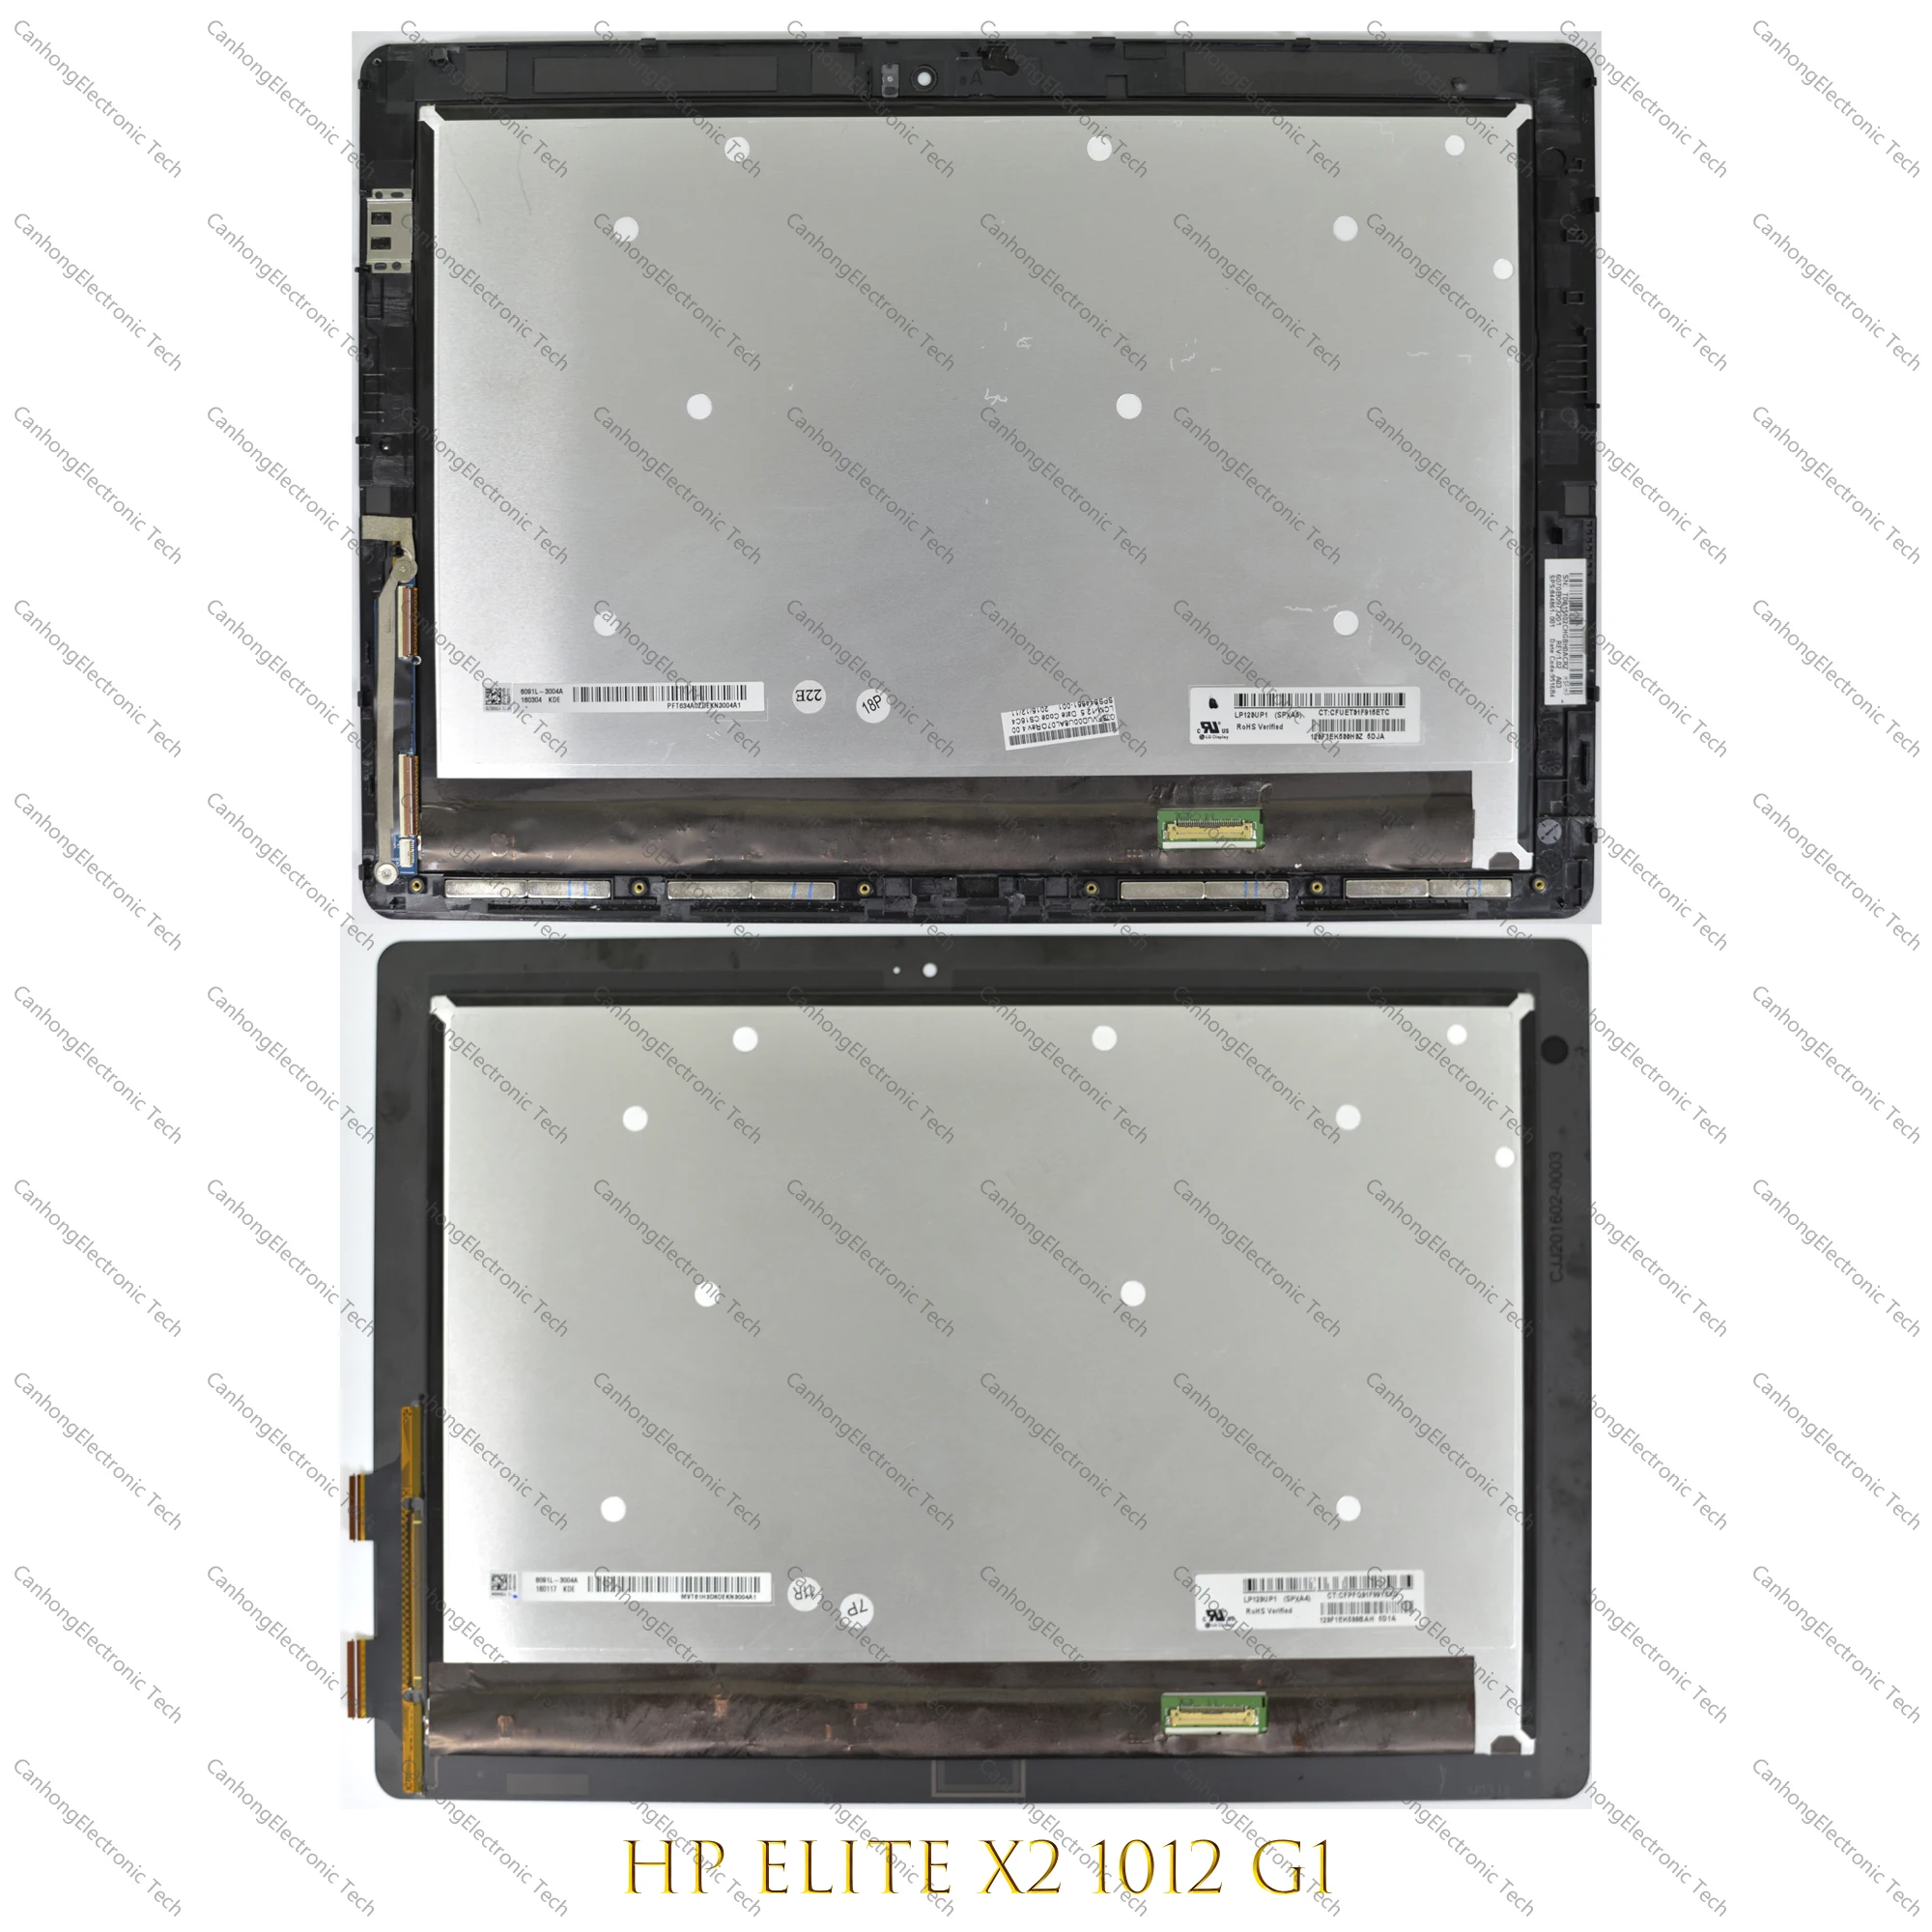 

844861-001 For HP Elite x2 1012 G1 1920*1280 LCD Touch Screen Digitizer Assembly With Frame LP120UP1-SPA4 SPA5